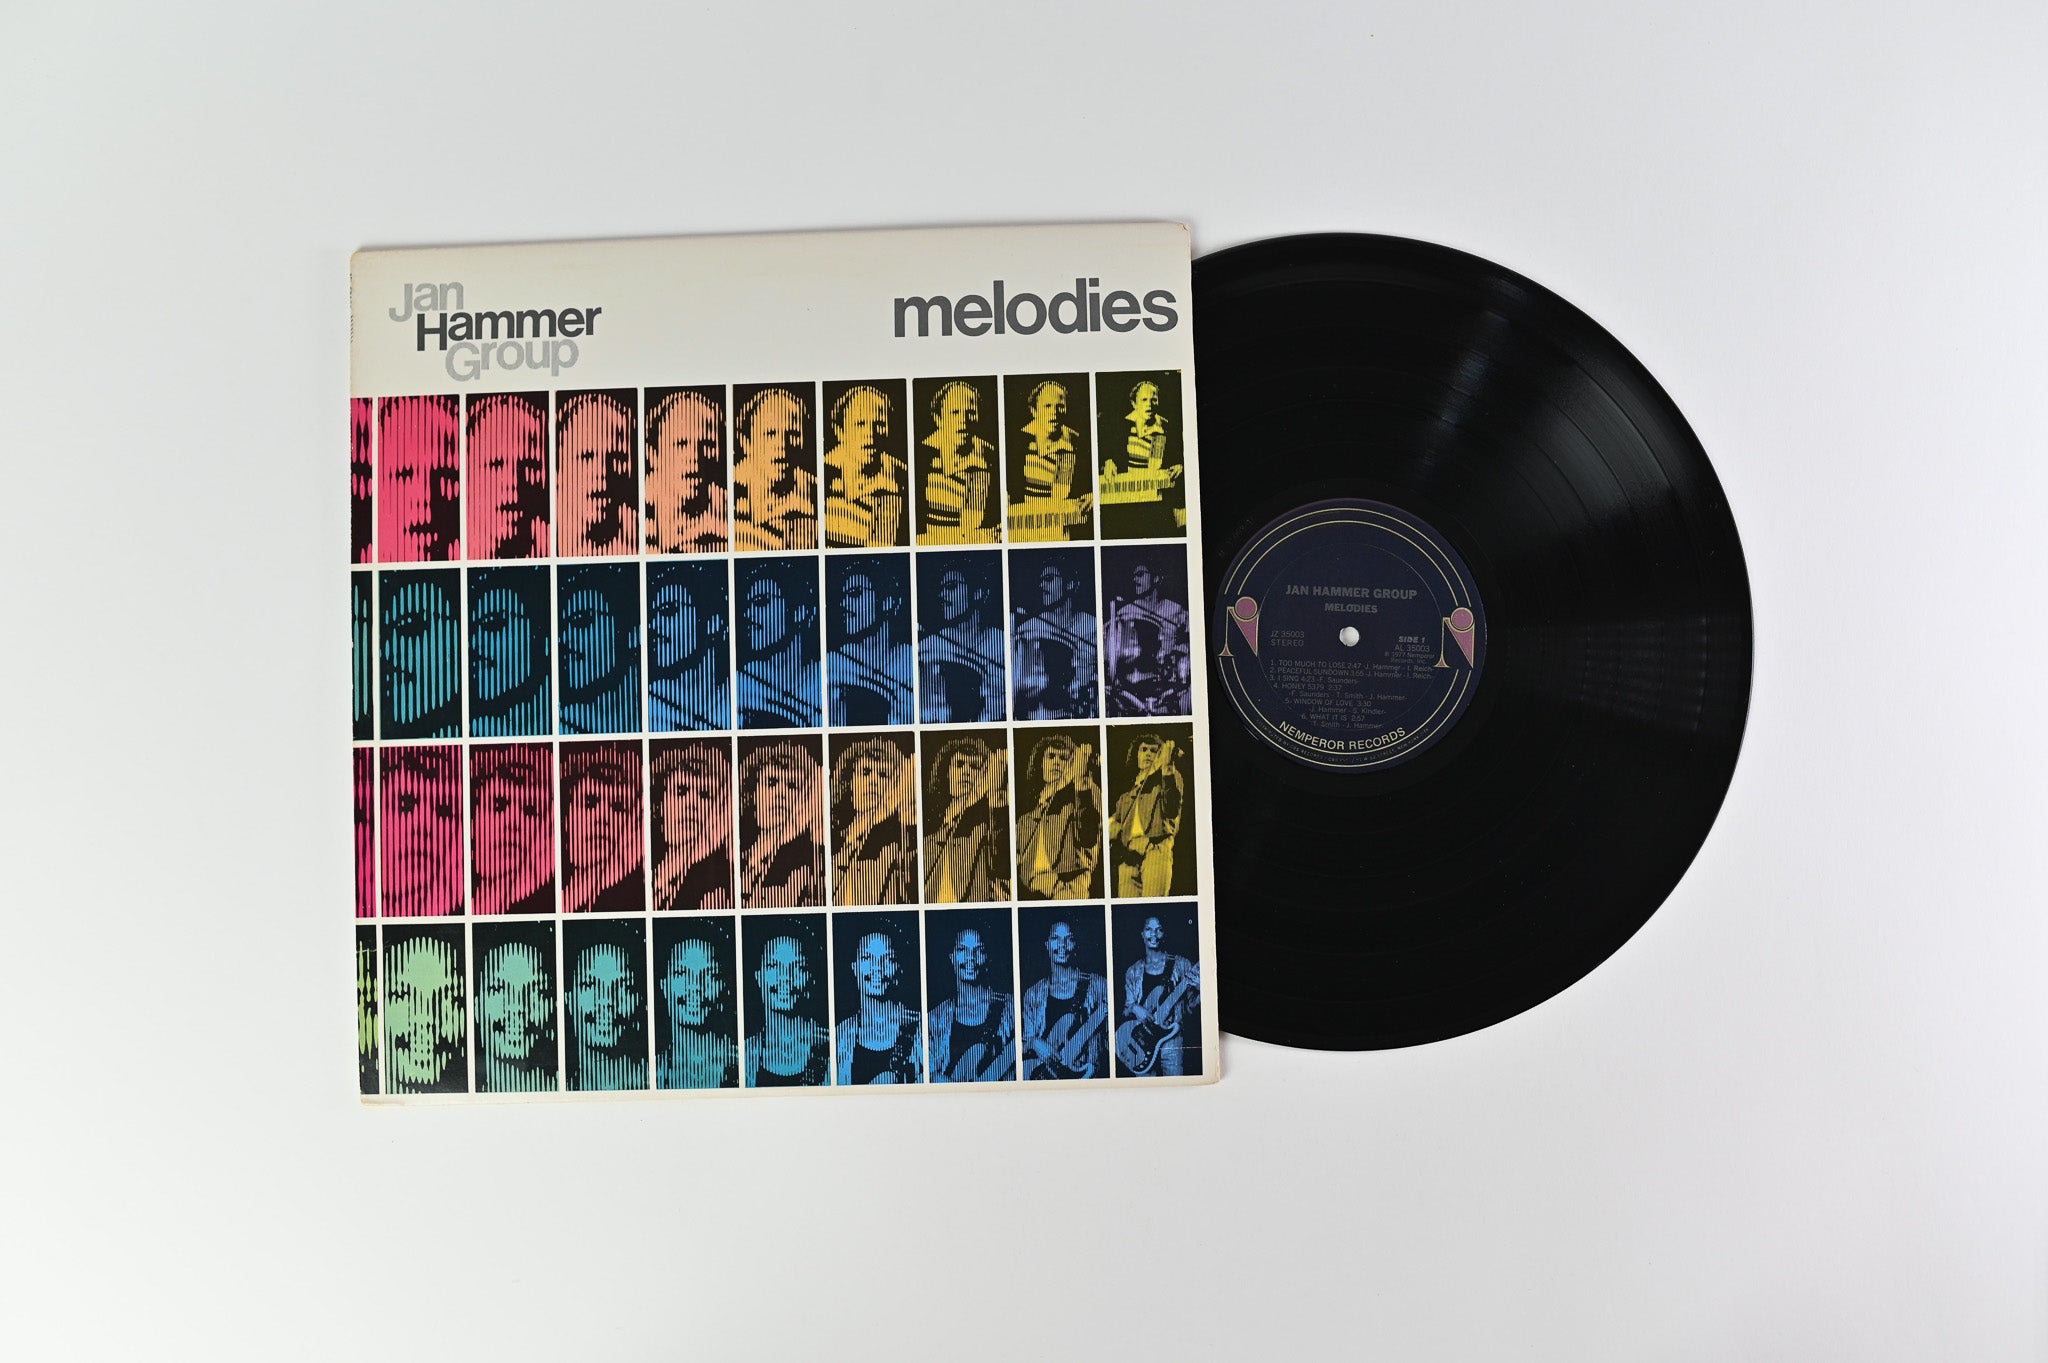 Jan Hammer Group - Melodies on Nemperor Records